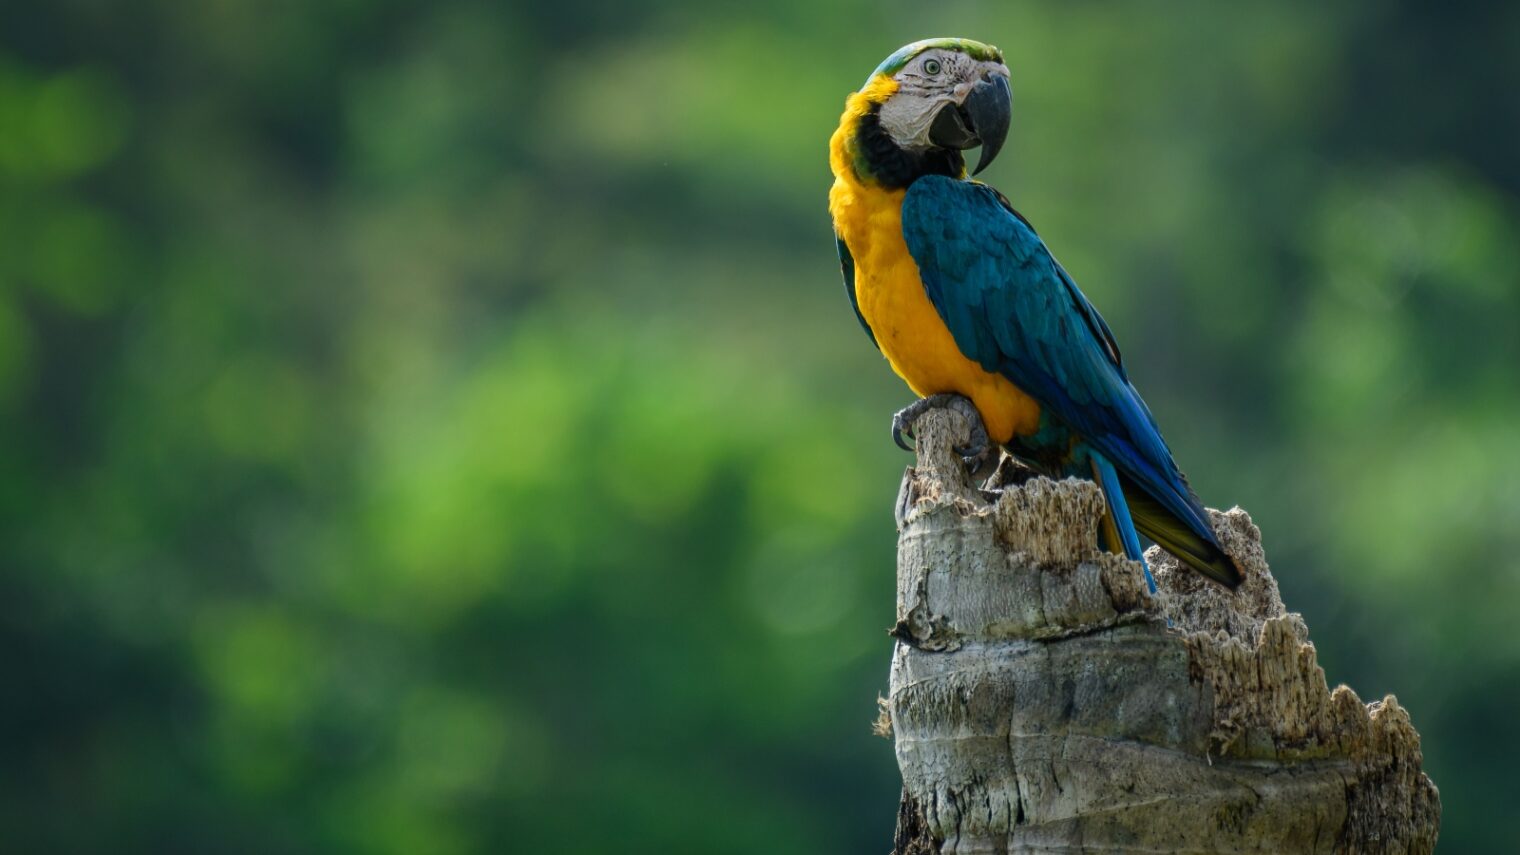 A blue-and-yellow macaw at home in Magdalena Valley, Colombia. Photo by Santiago Rosado